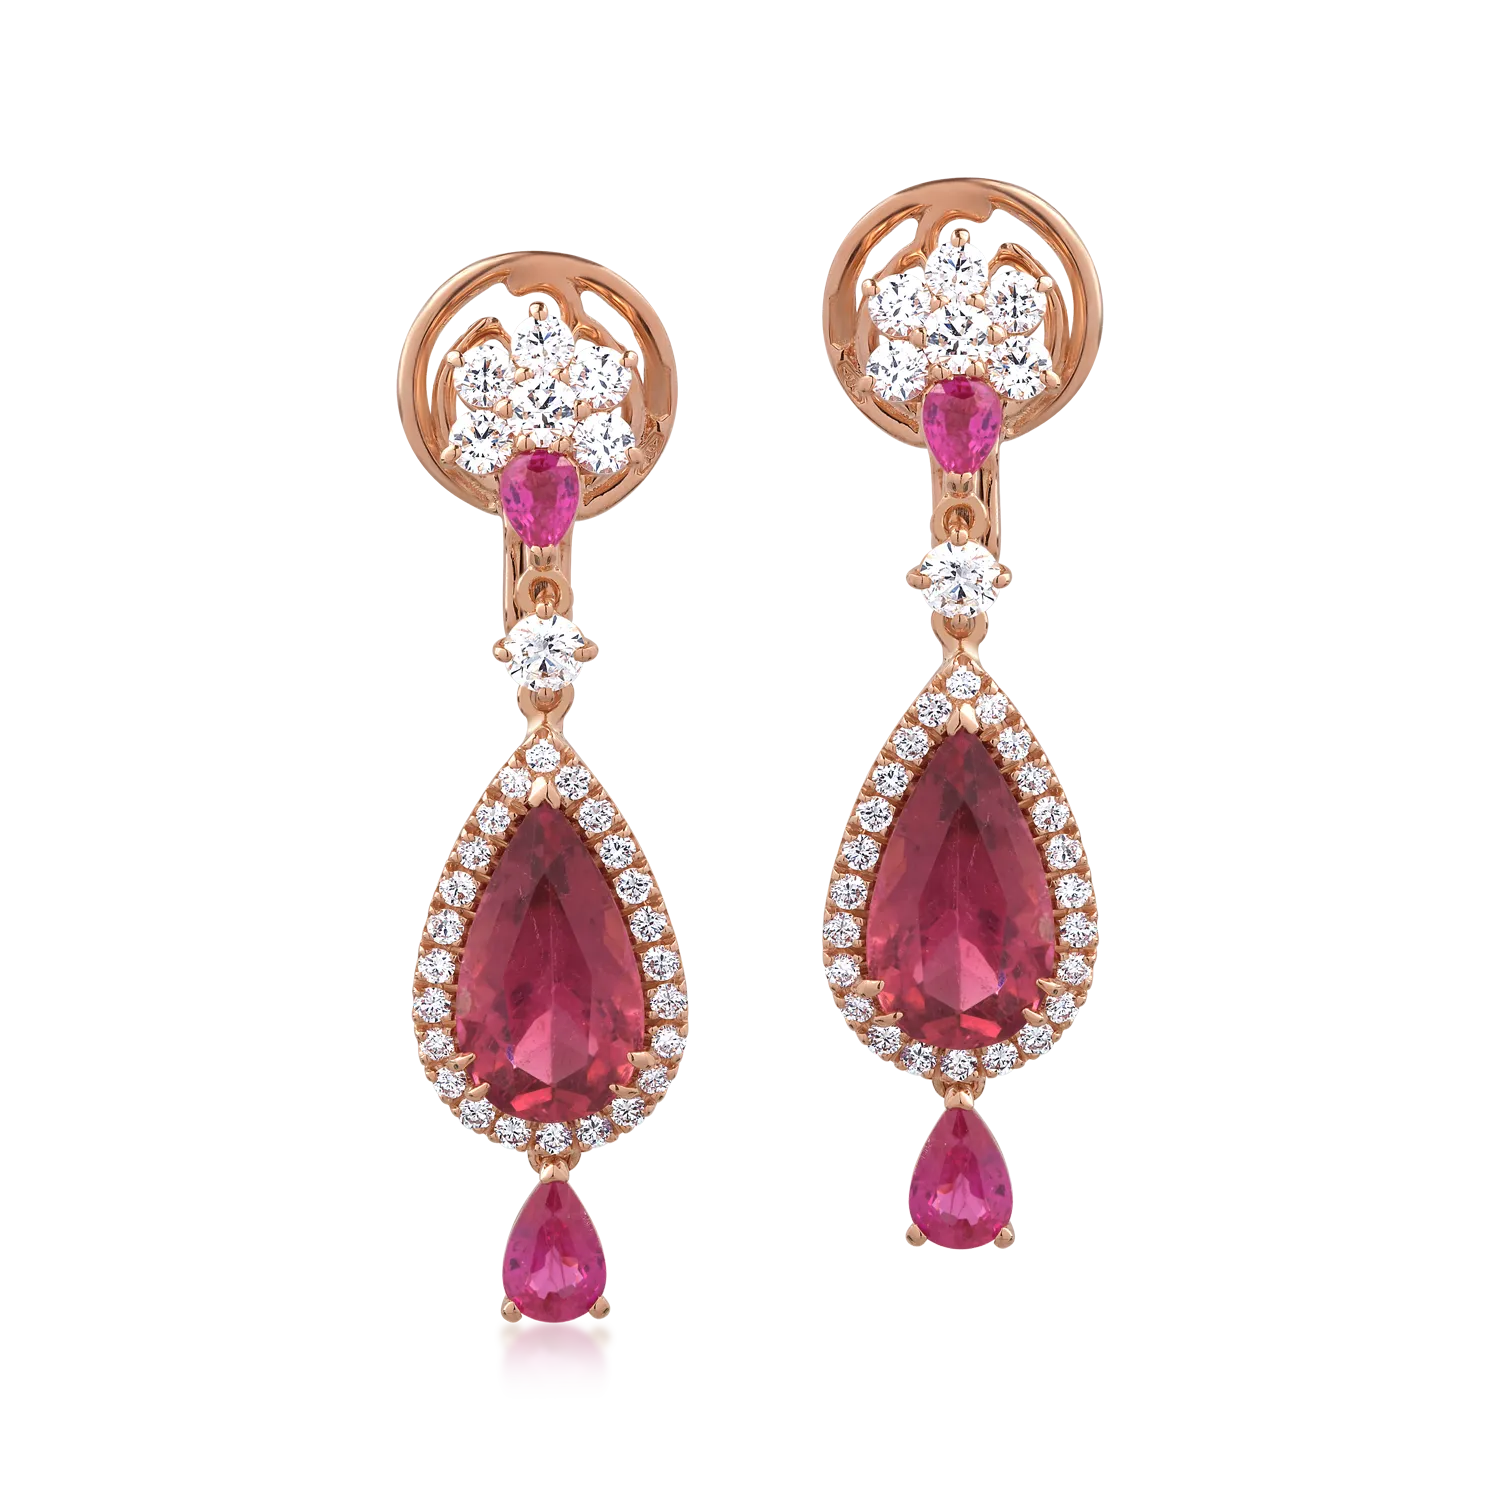 18K rose gold earrings with 8.23ct precious and semi-precious stones